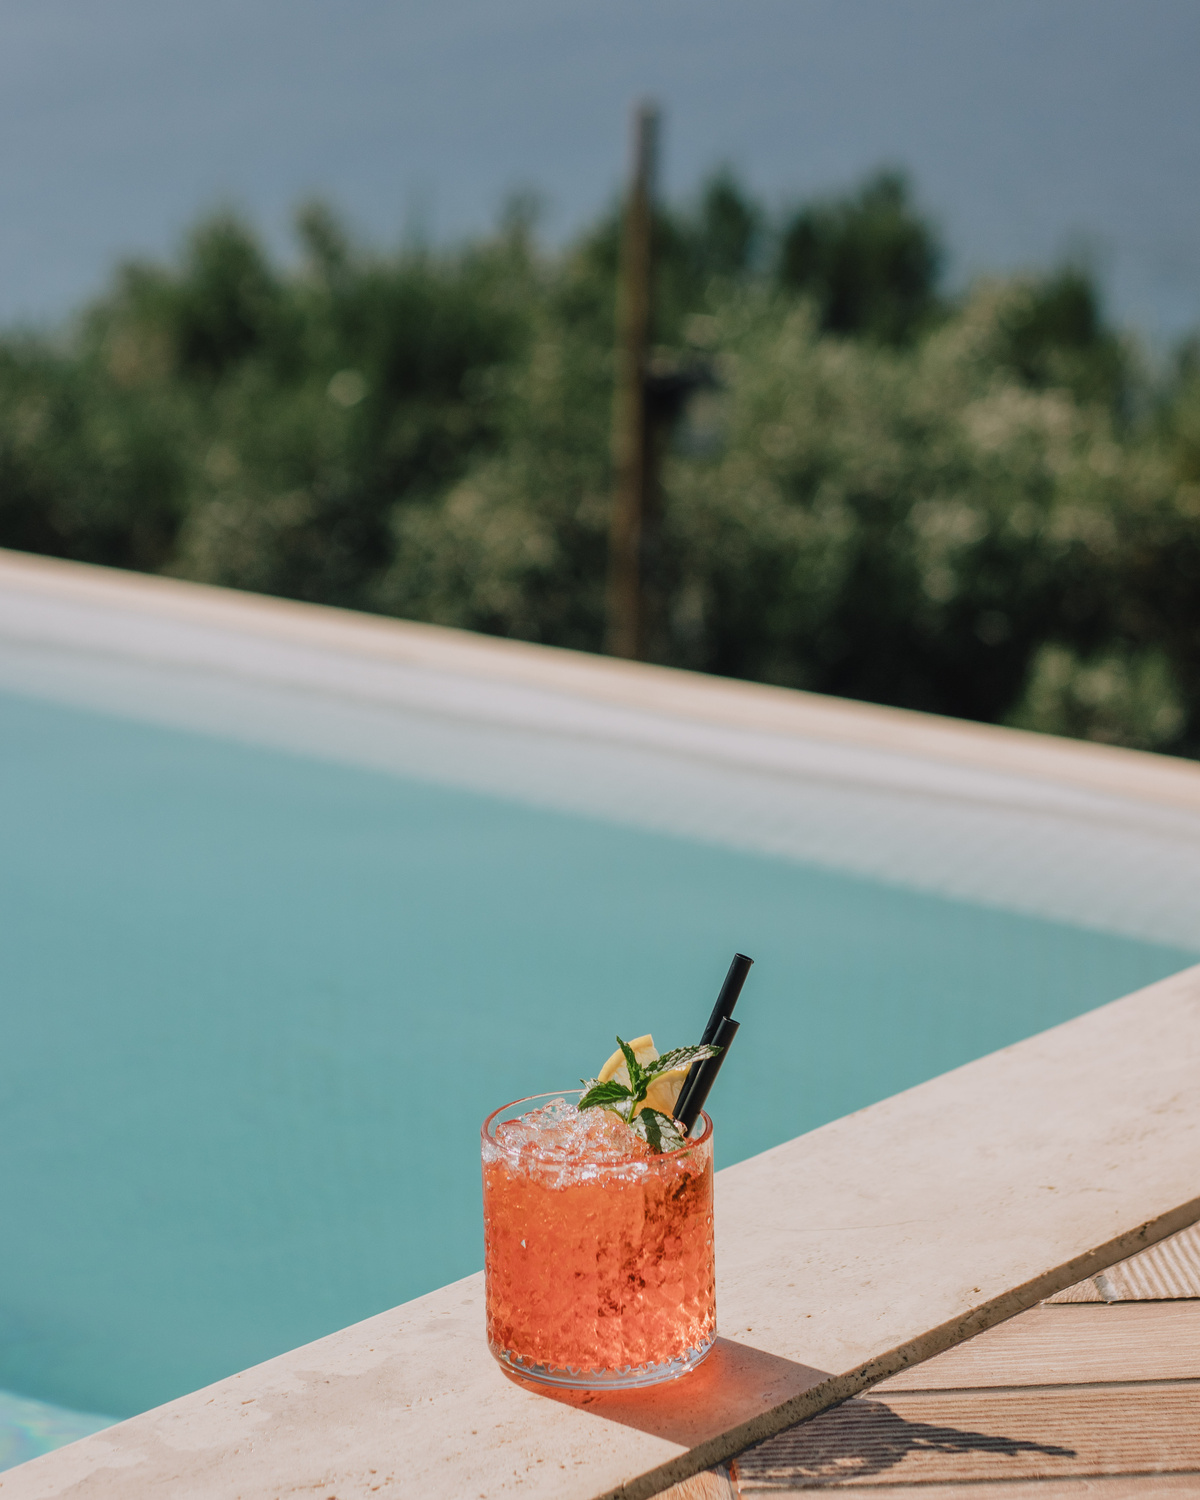 Cold Drink in Glass Against Swimming Pool